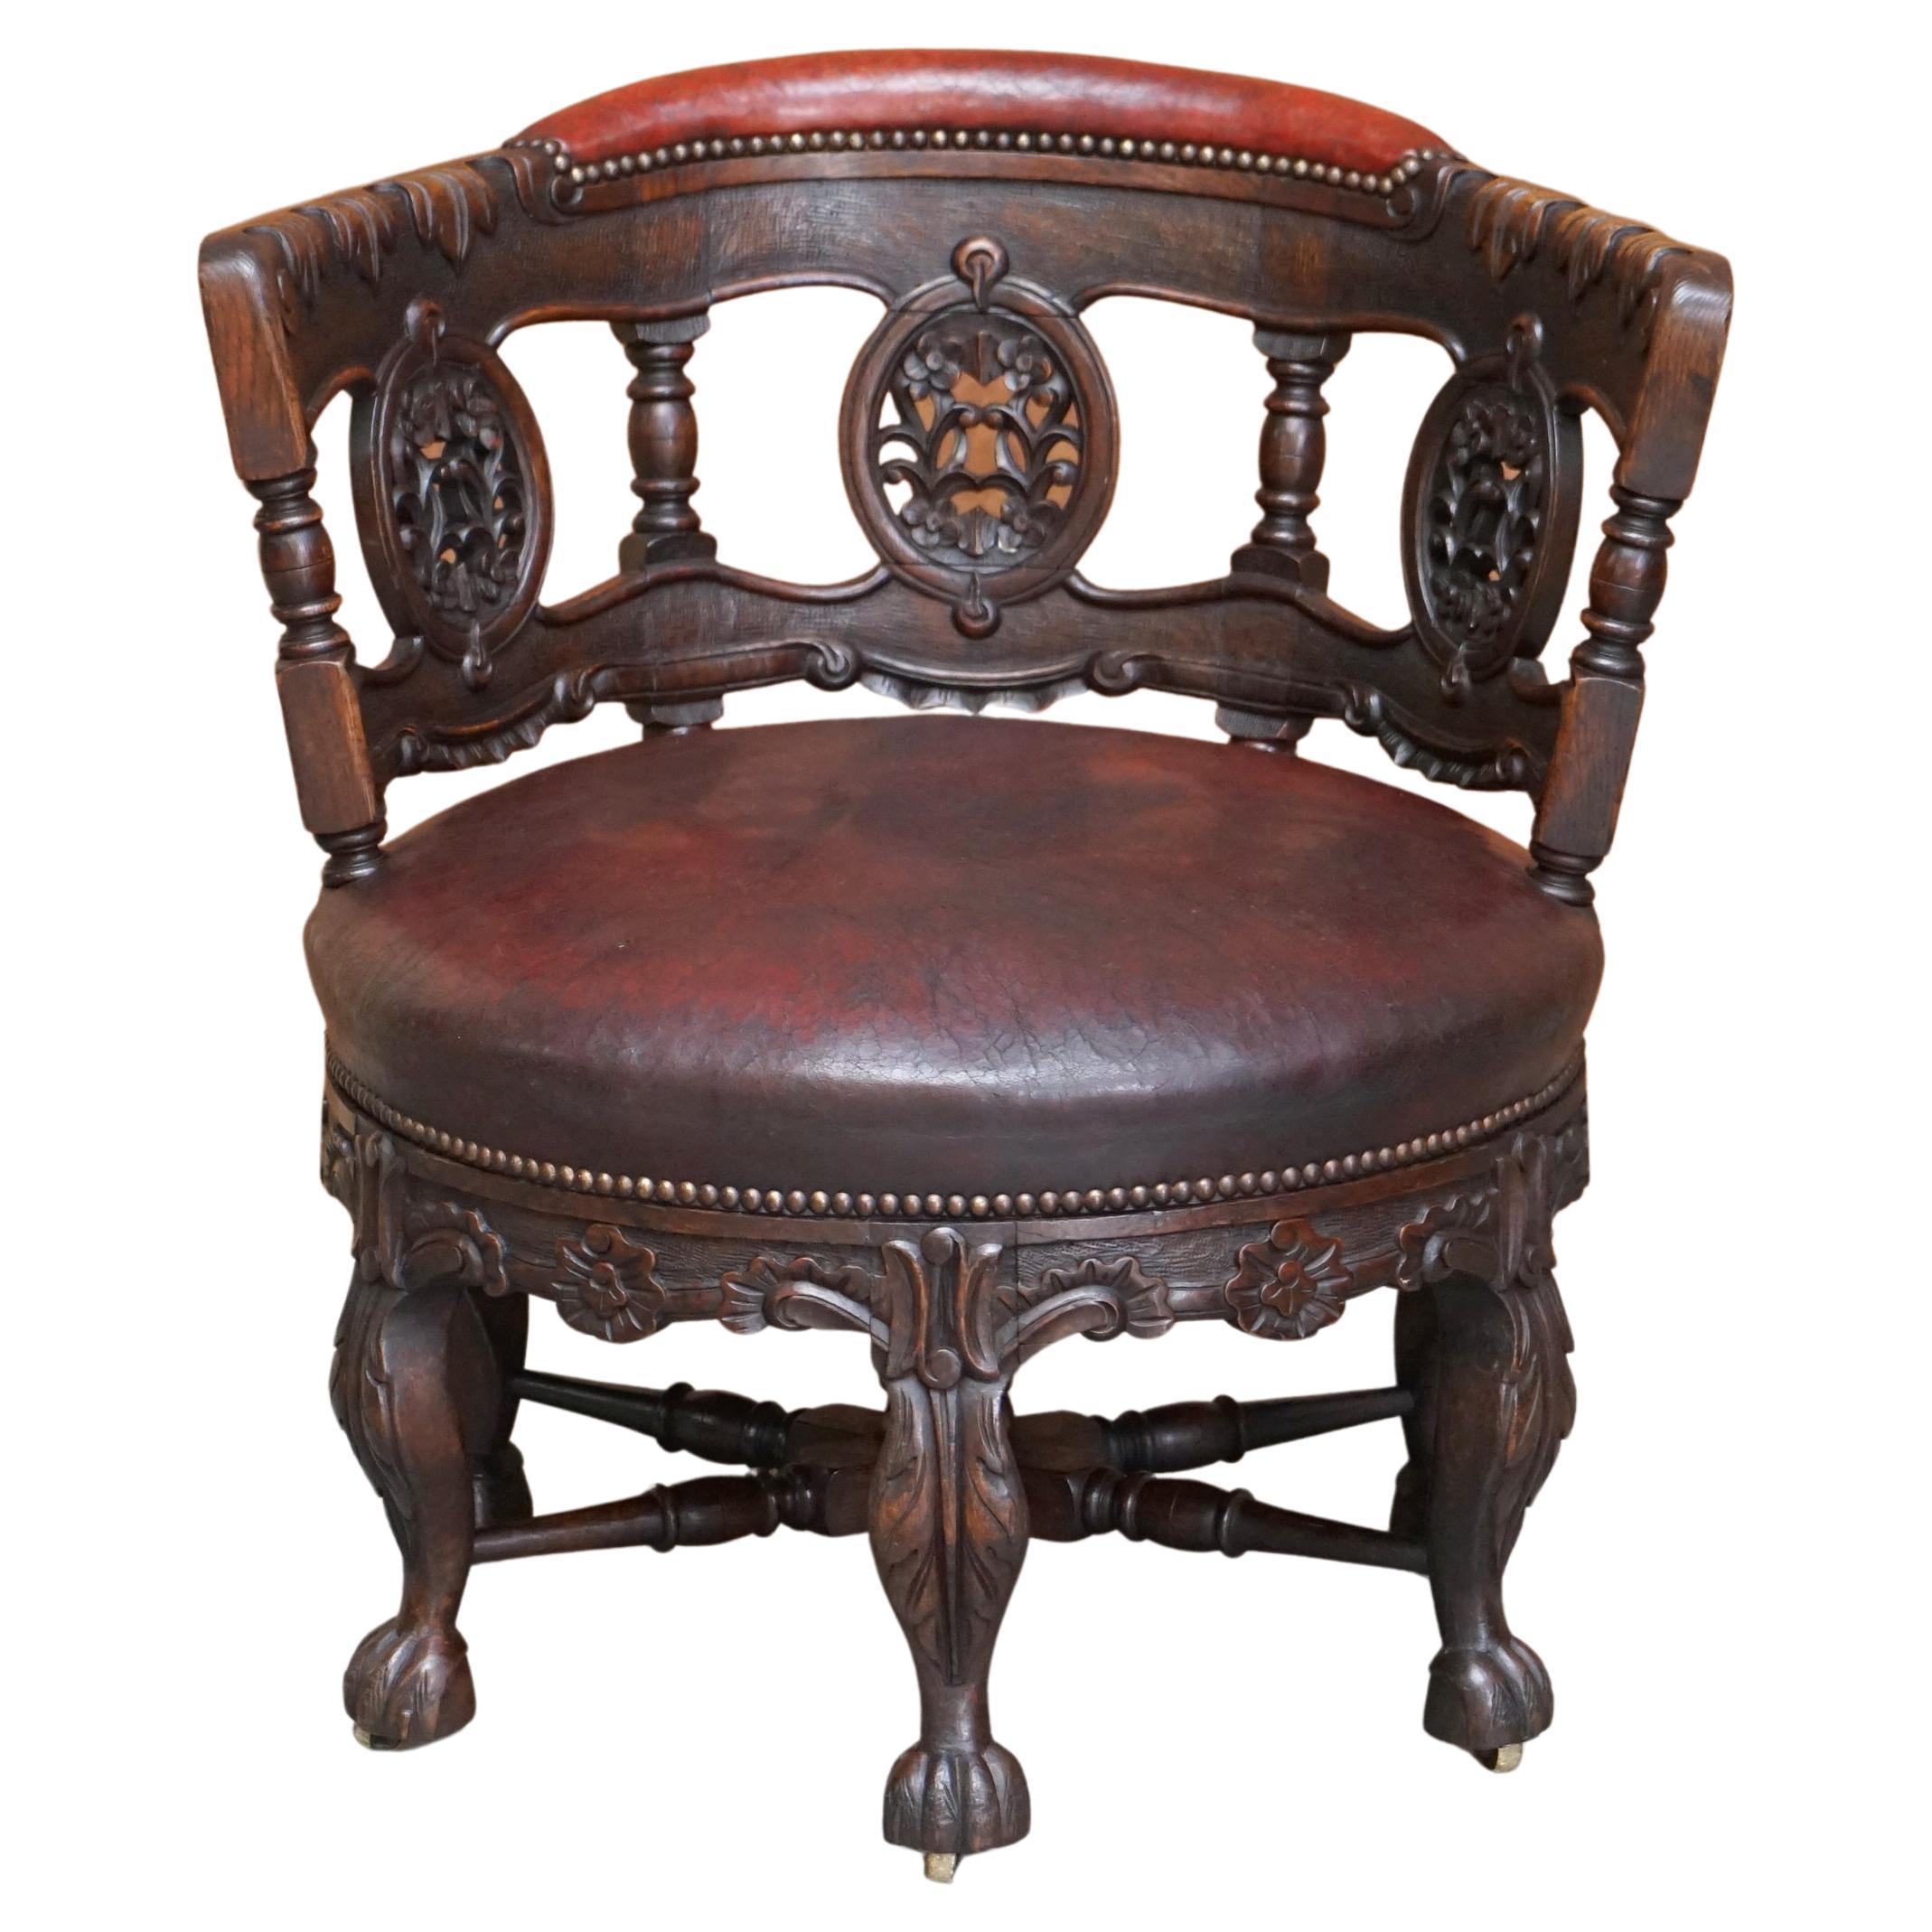 Antique Carved Victorian Oxblood Leather Burgermeister Chair 17th Century Design